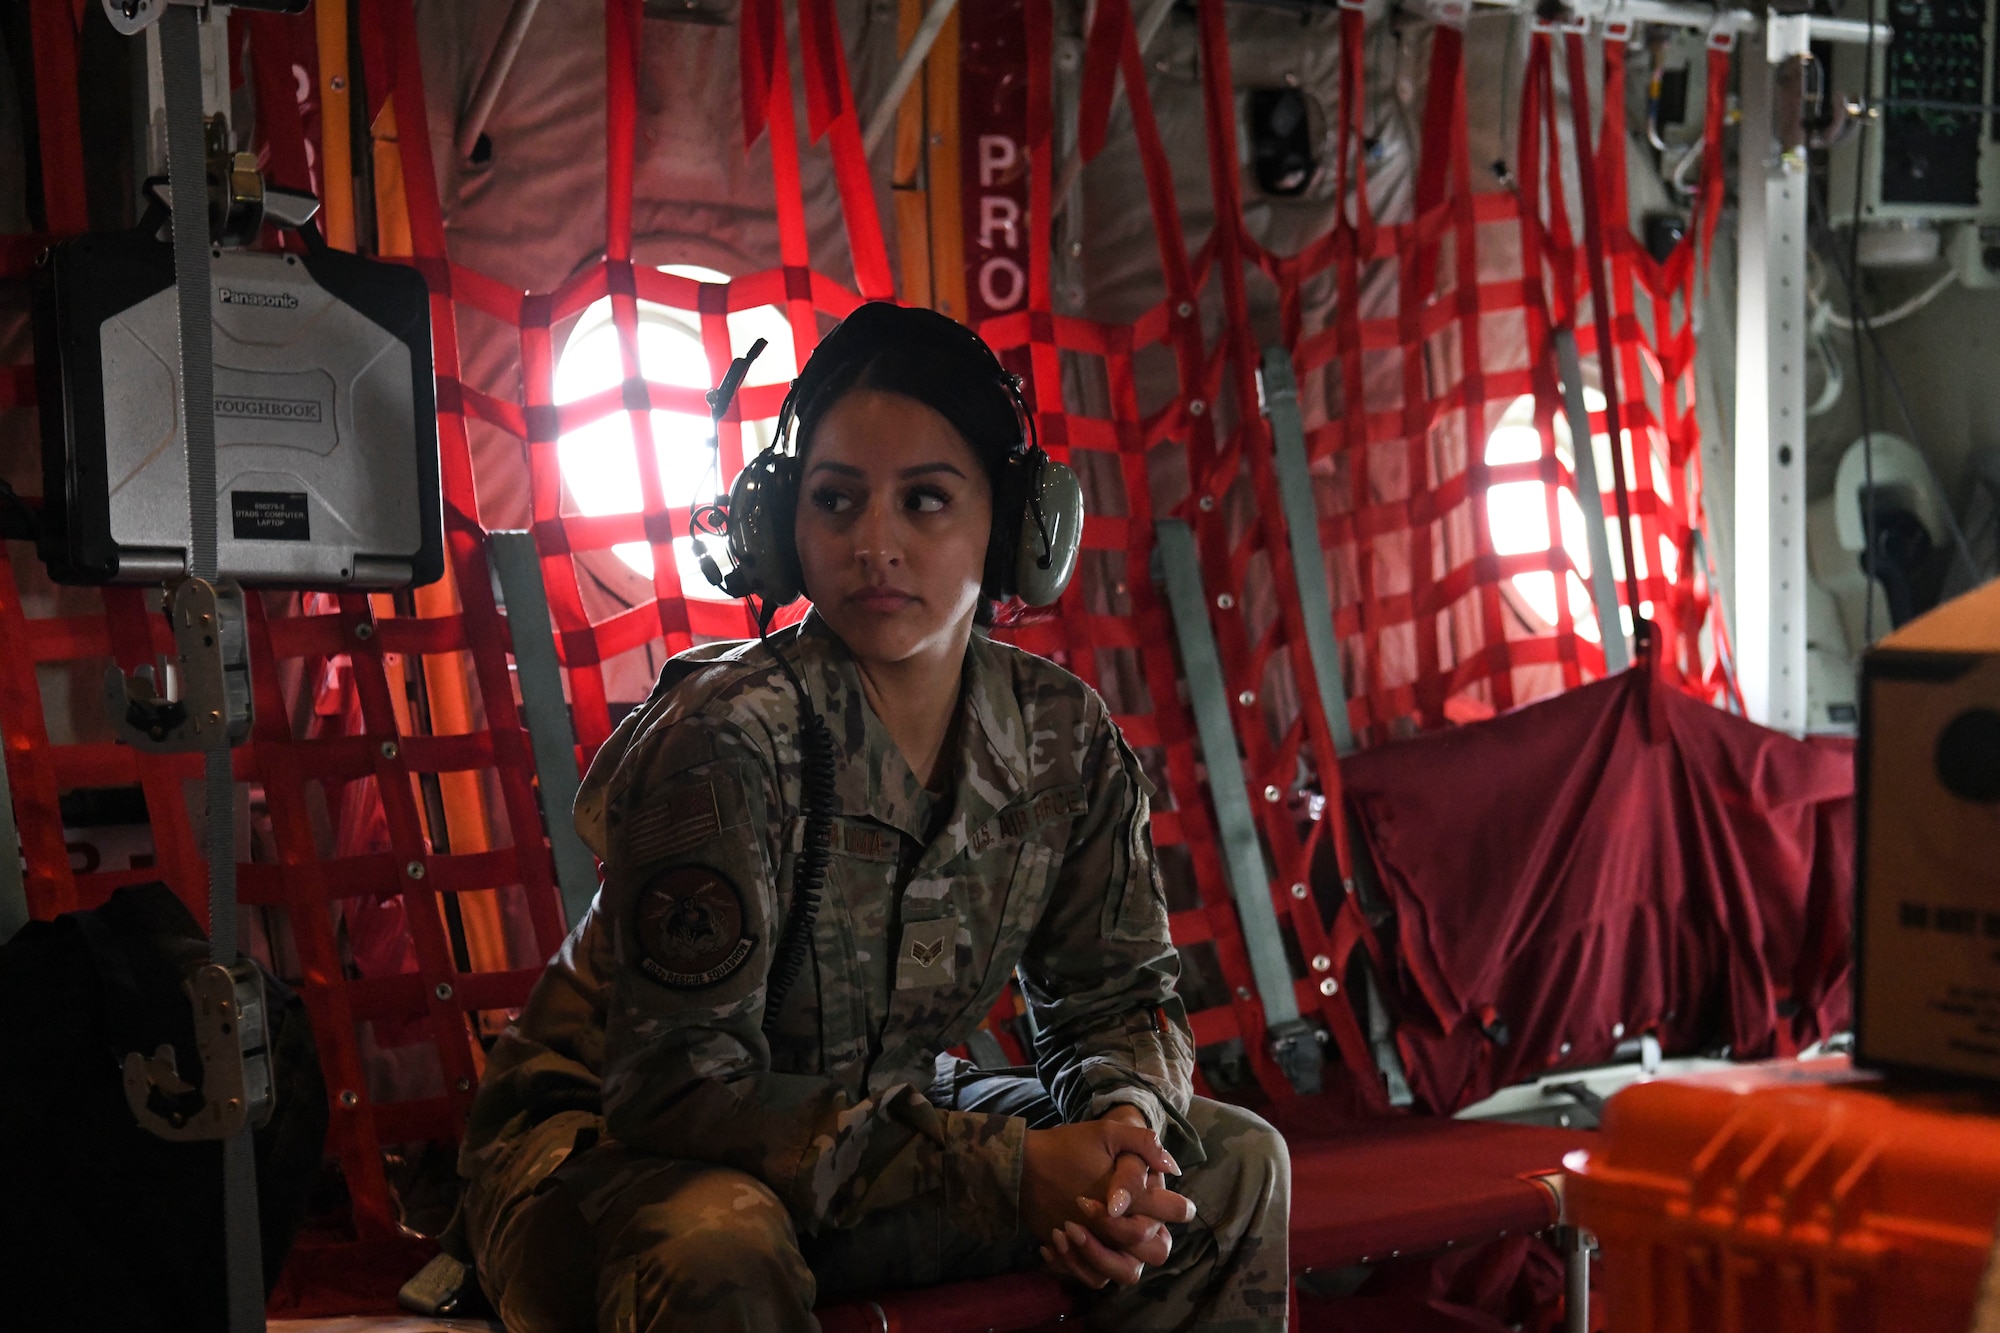 N.Y. Air National Guard 106th Rescue Wing Senior Airman Jocelyn Tapia-Puma, a 102nd Rescue Squadron aviation resource manager, looks toward the back of an HC-130J Combat King II search and rescue aircraft, May 20, 2022. Tapia-Puma was asked to join a search and rescue mission as a Spanish interpreter between members of the 102nd Rescue Squadron and passengers on-board a 32-foot vessel 1,200 miles from the coast of Long Island, who had a passenger severely burned. (U.S. Air National Guard photo by SSgt. Daniel H. Farrell)